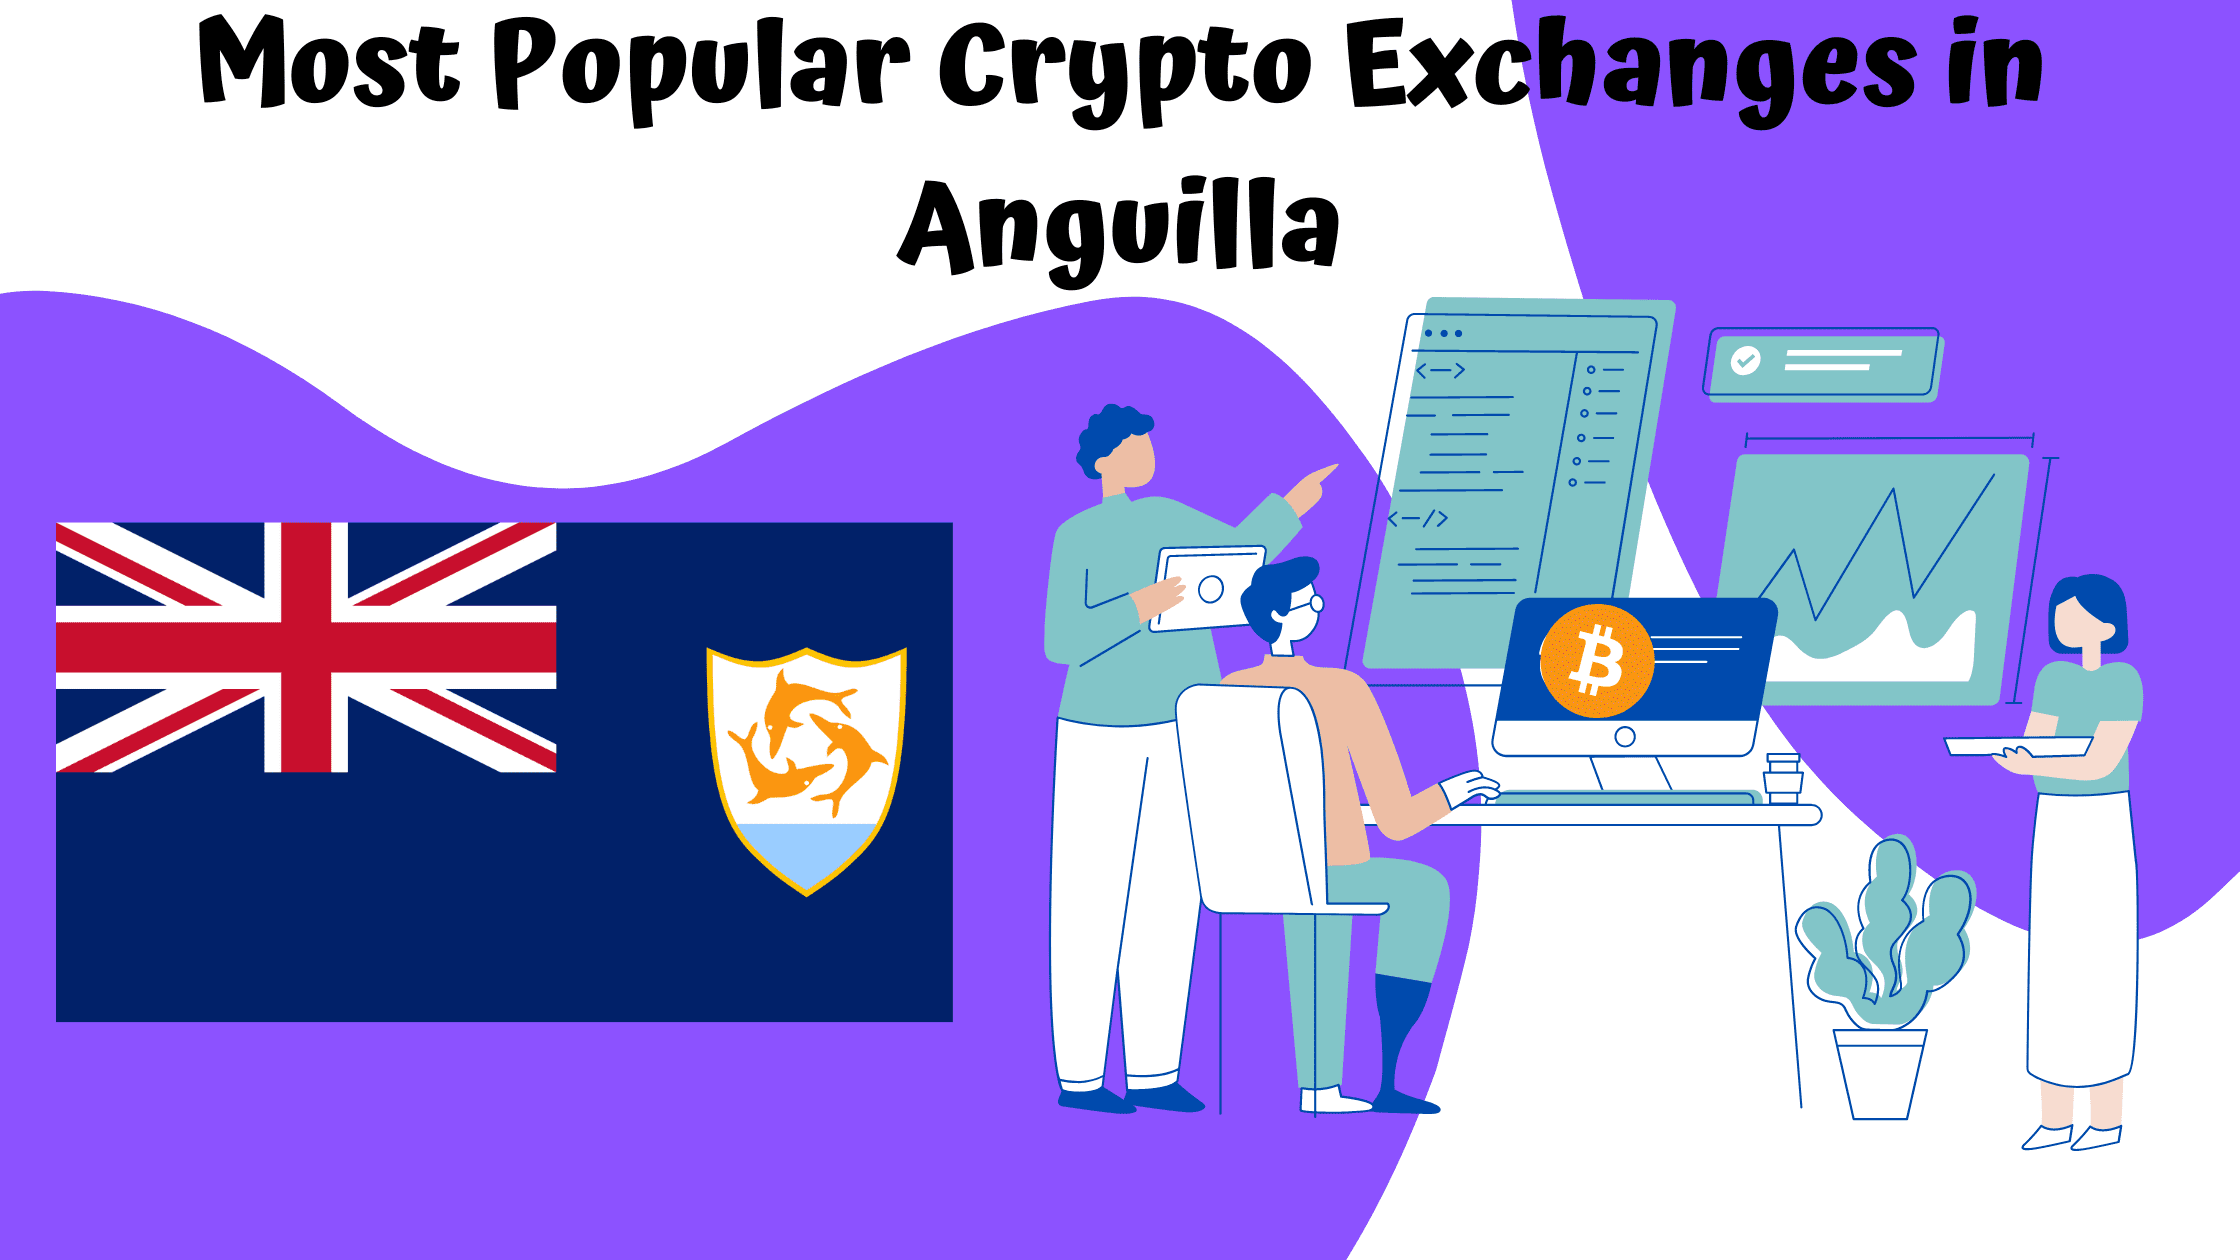 How to buy bitcoin in Anguilla